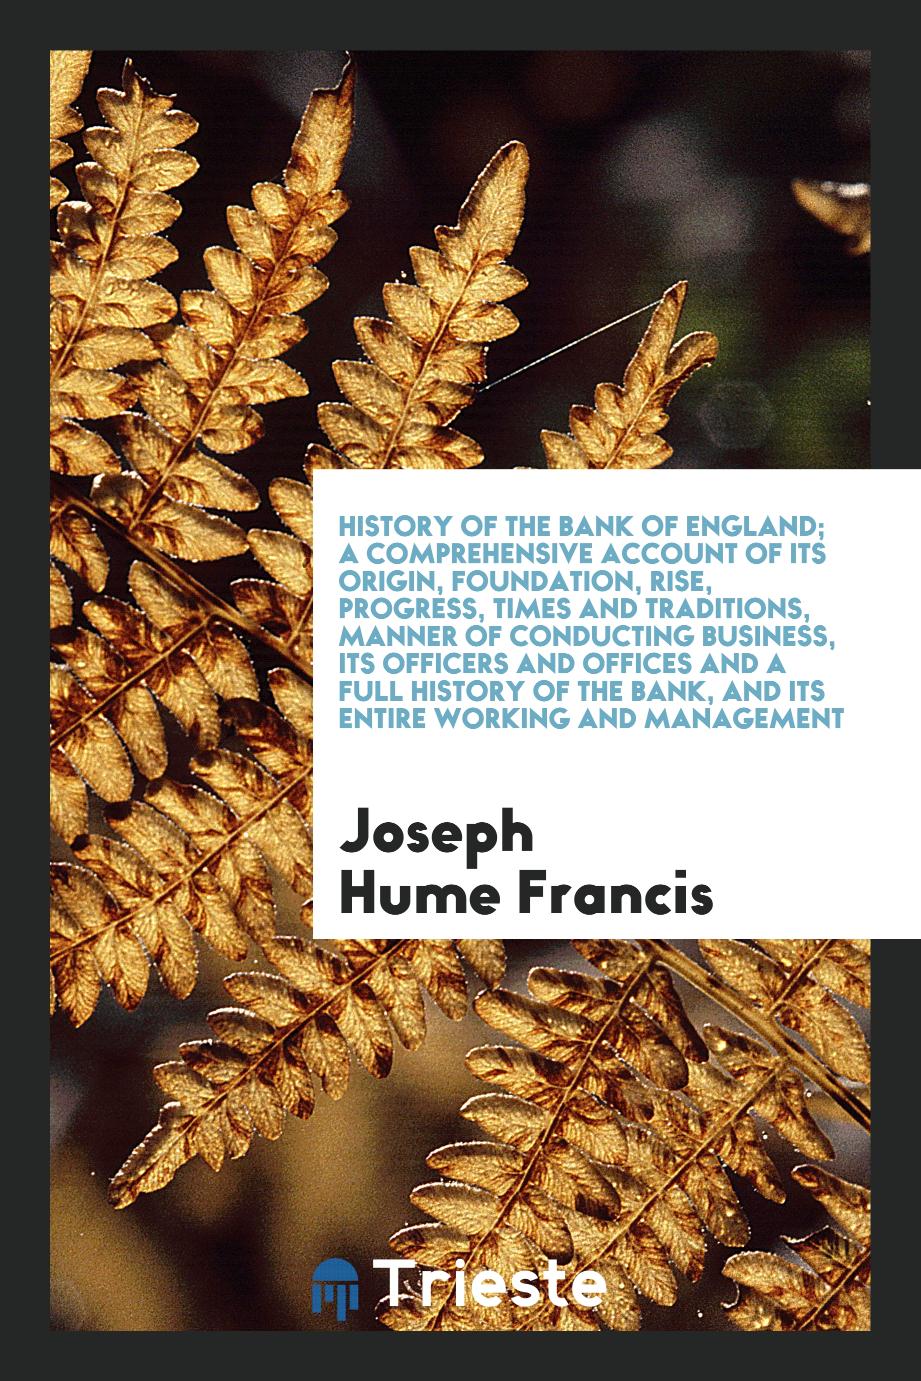 History of the Bank of England; A Comprehensive Account of Its Origin, Foundation, Rise, Progress, Times and Traditions, Manner of Conducting Business, Its Officers and Offices and a Full History of the Bank, and Its Entire Working and Management